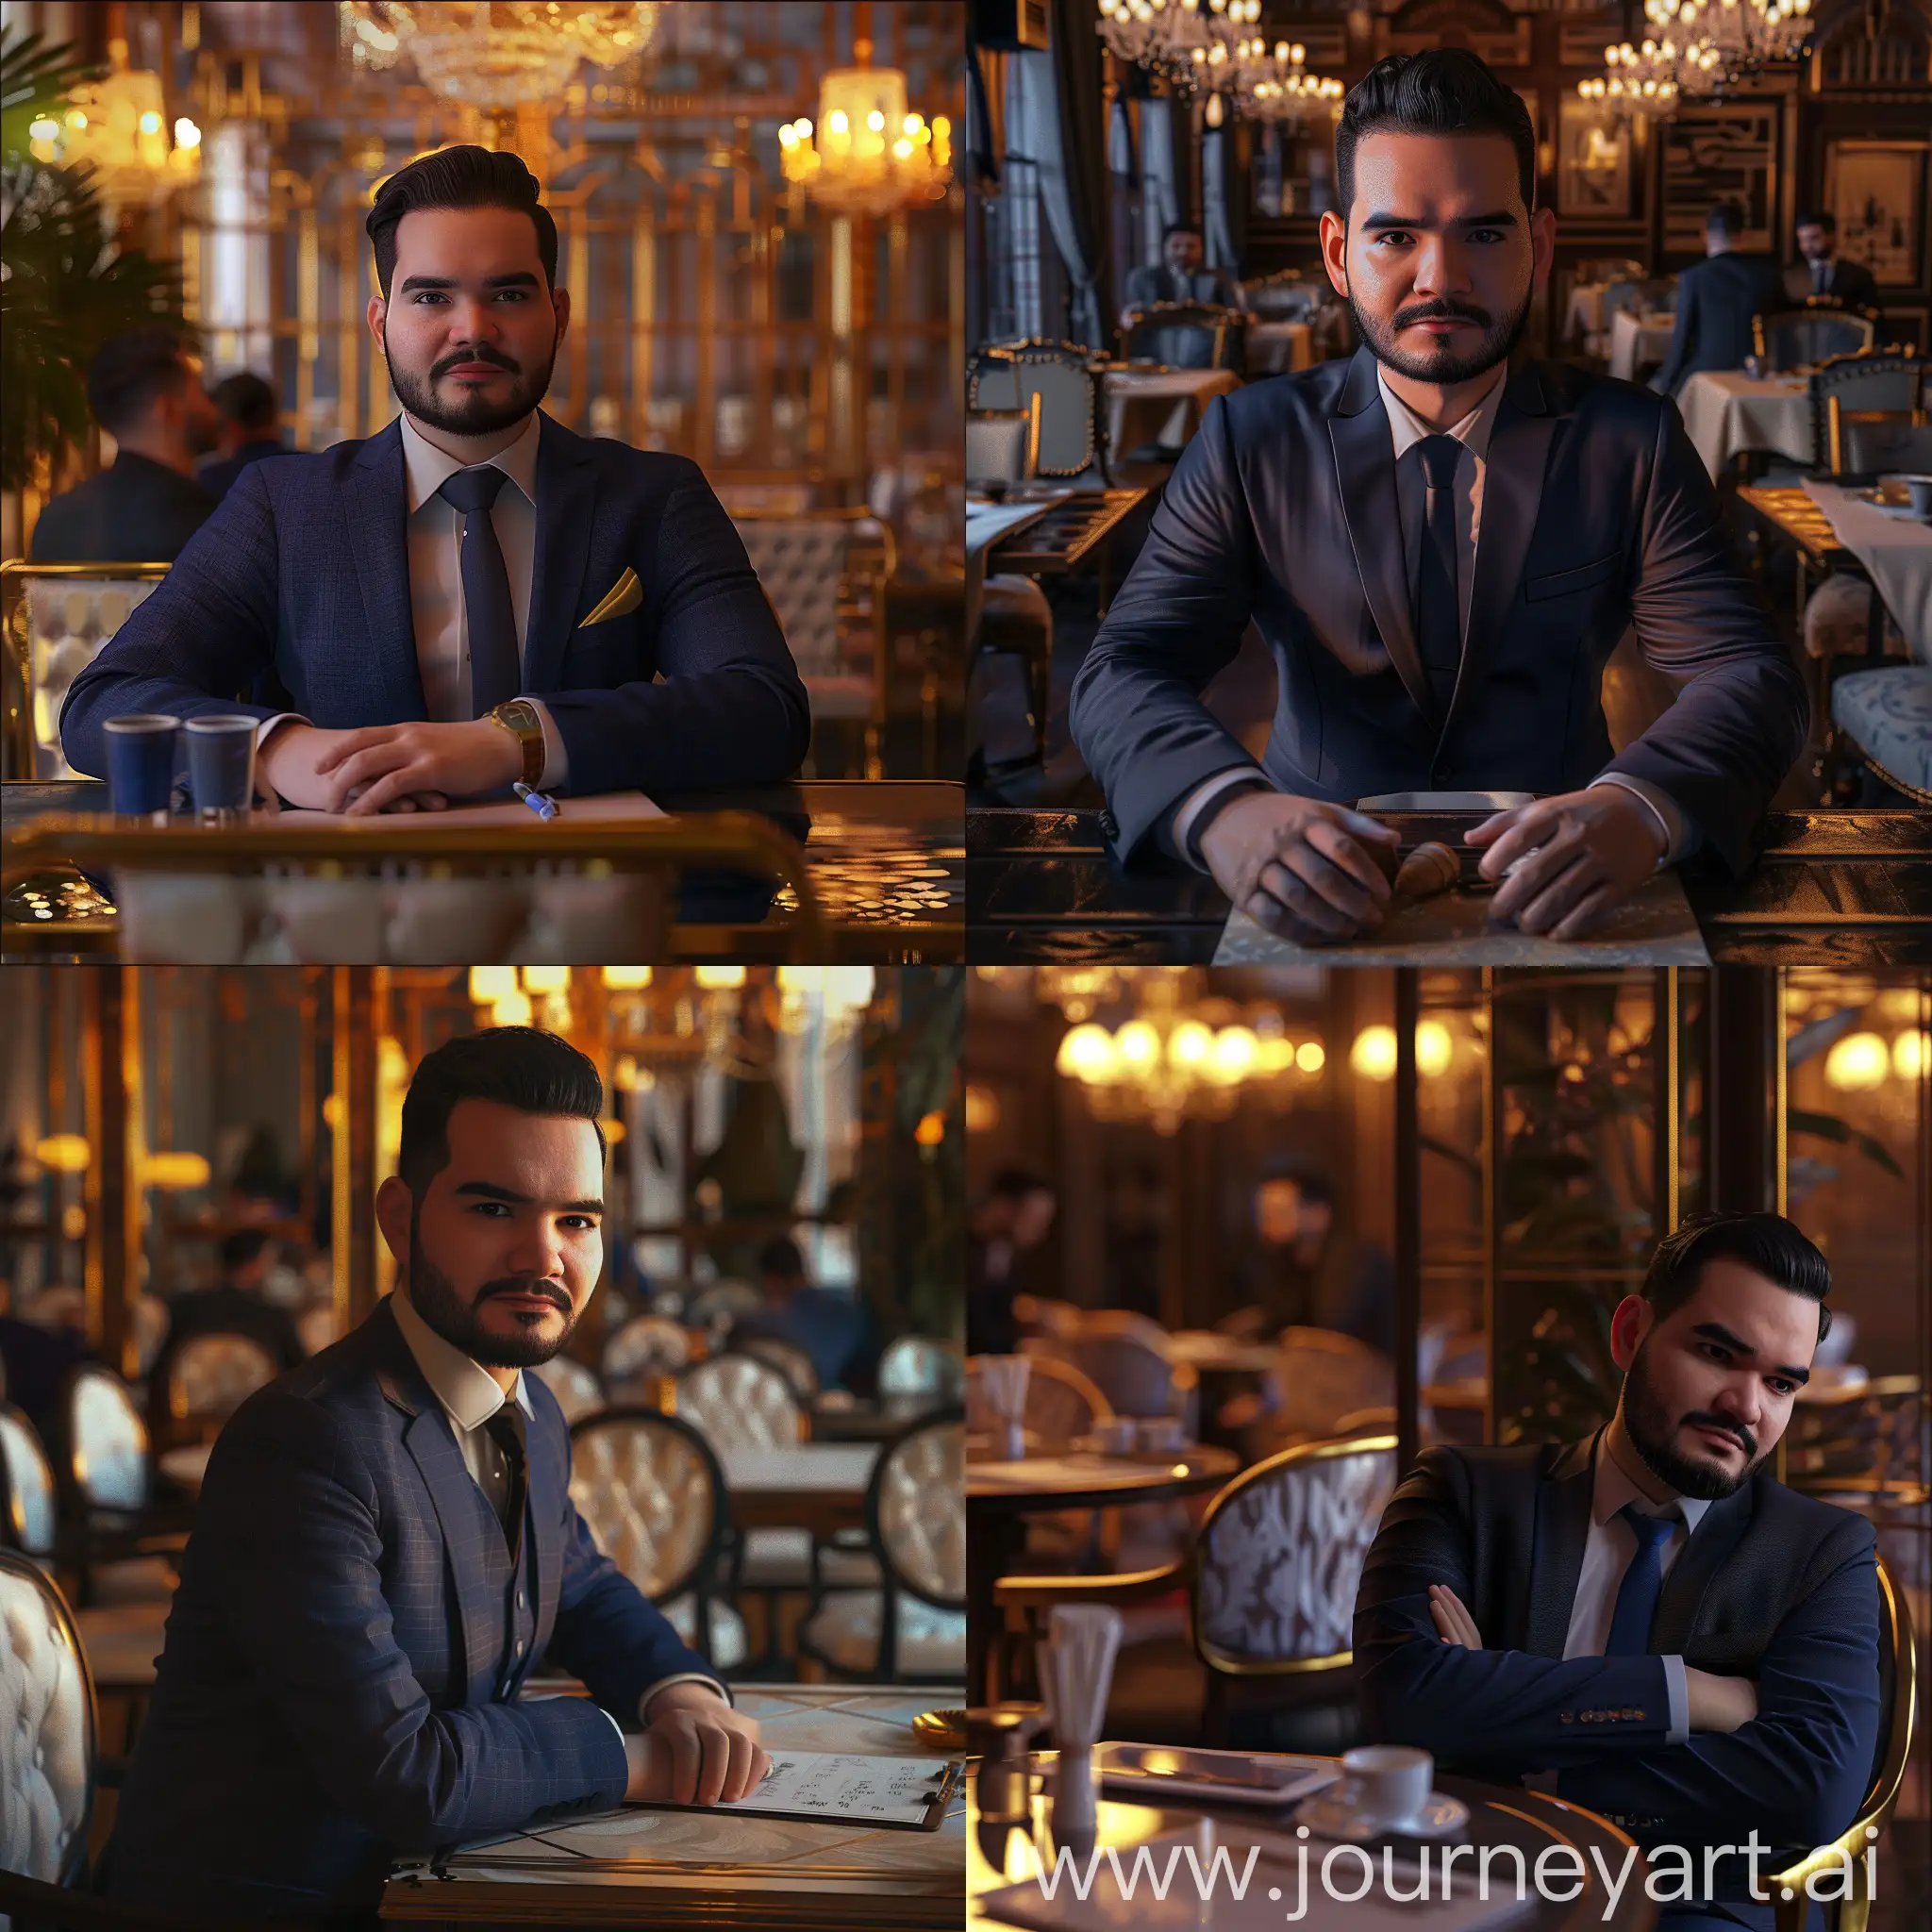 Professional-Man-in-Exquisite-Suit-at-Cafe-Table-with-Desk